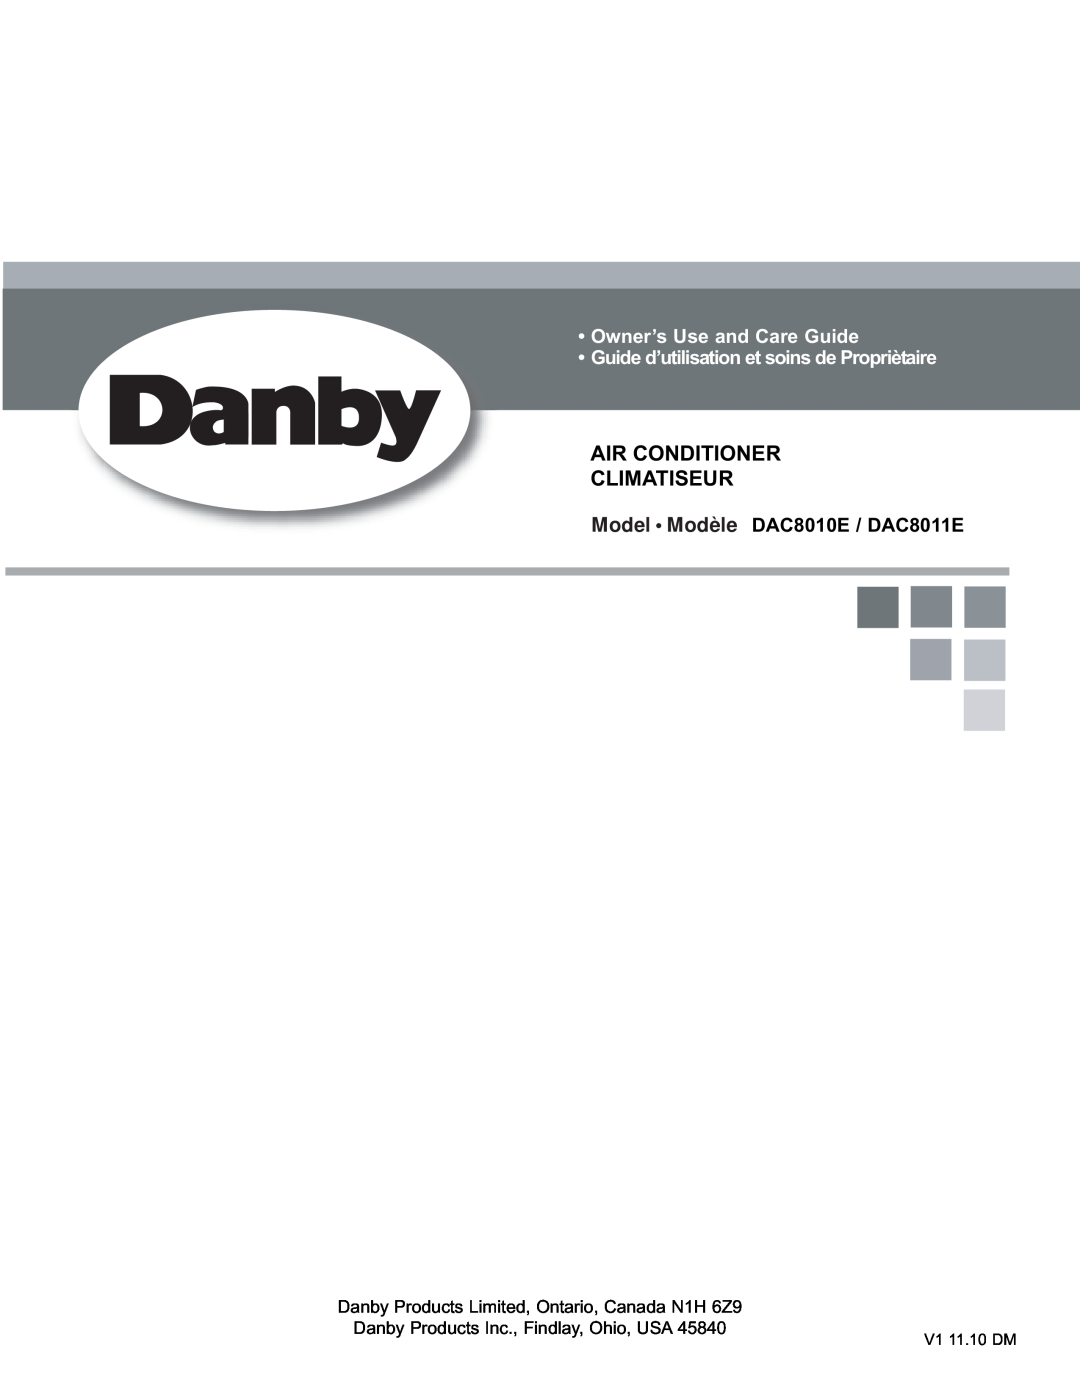 Danby manual Air Conditioner Climatiseur, Model Modèle DAC8010EModelo / DAC8011E, Owner’s Use and Care Guide 